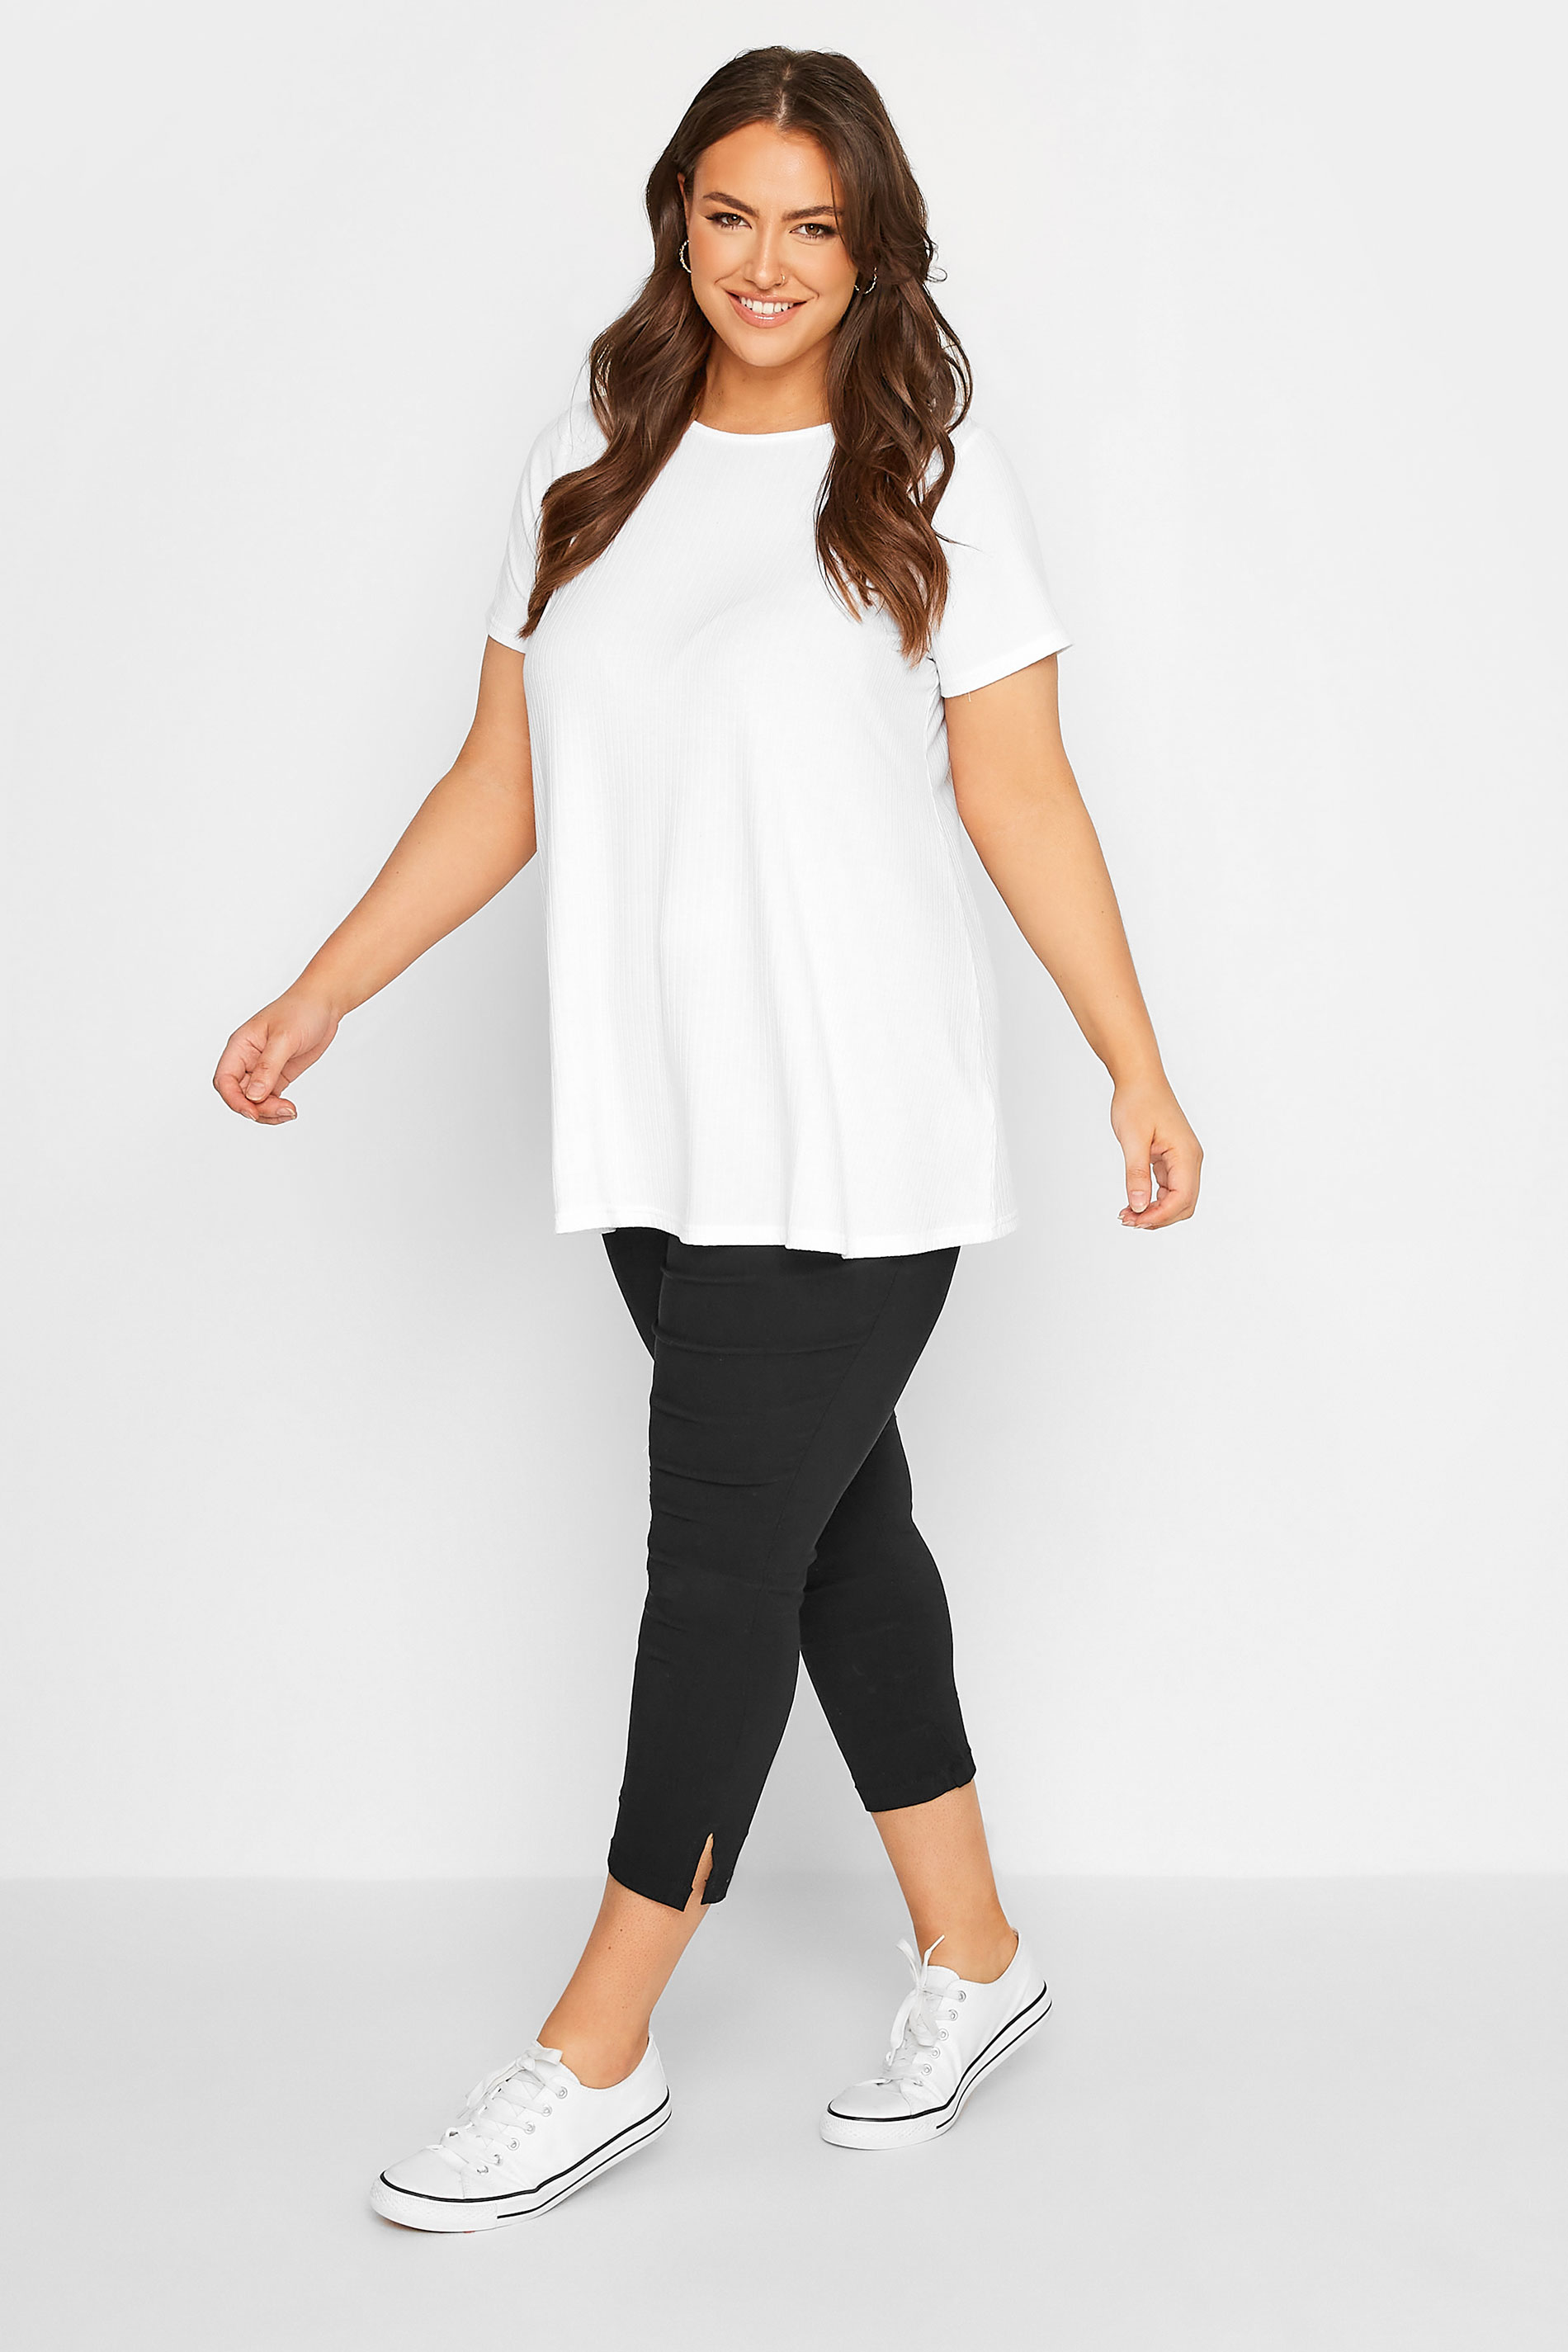 Black Bengaline Cropped Pull On Trousers, plus size 16 to 36 2